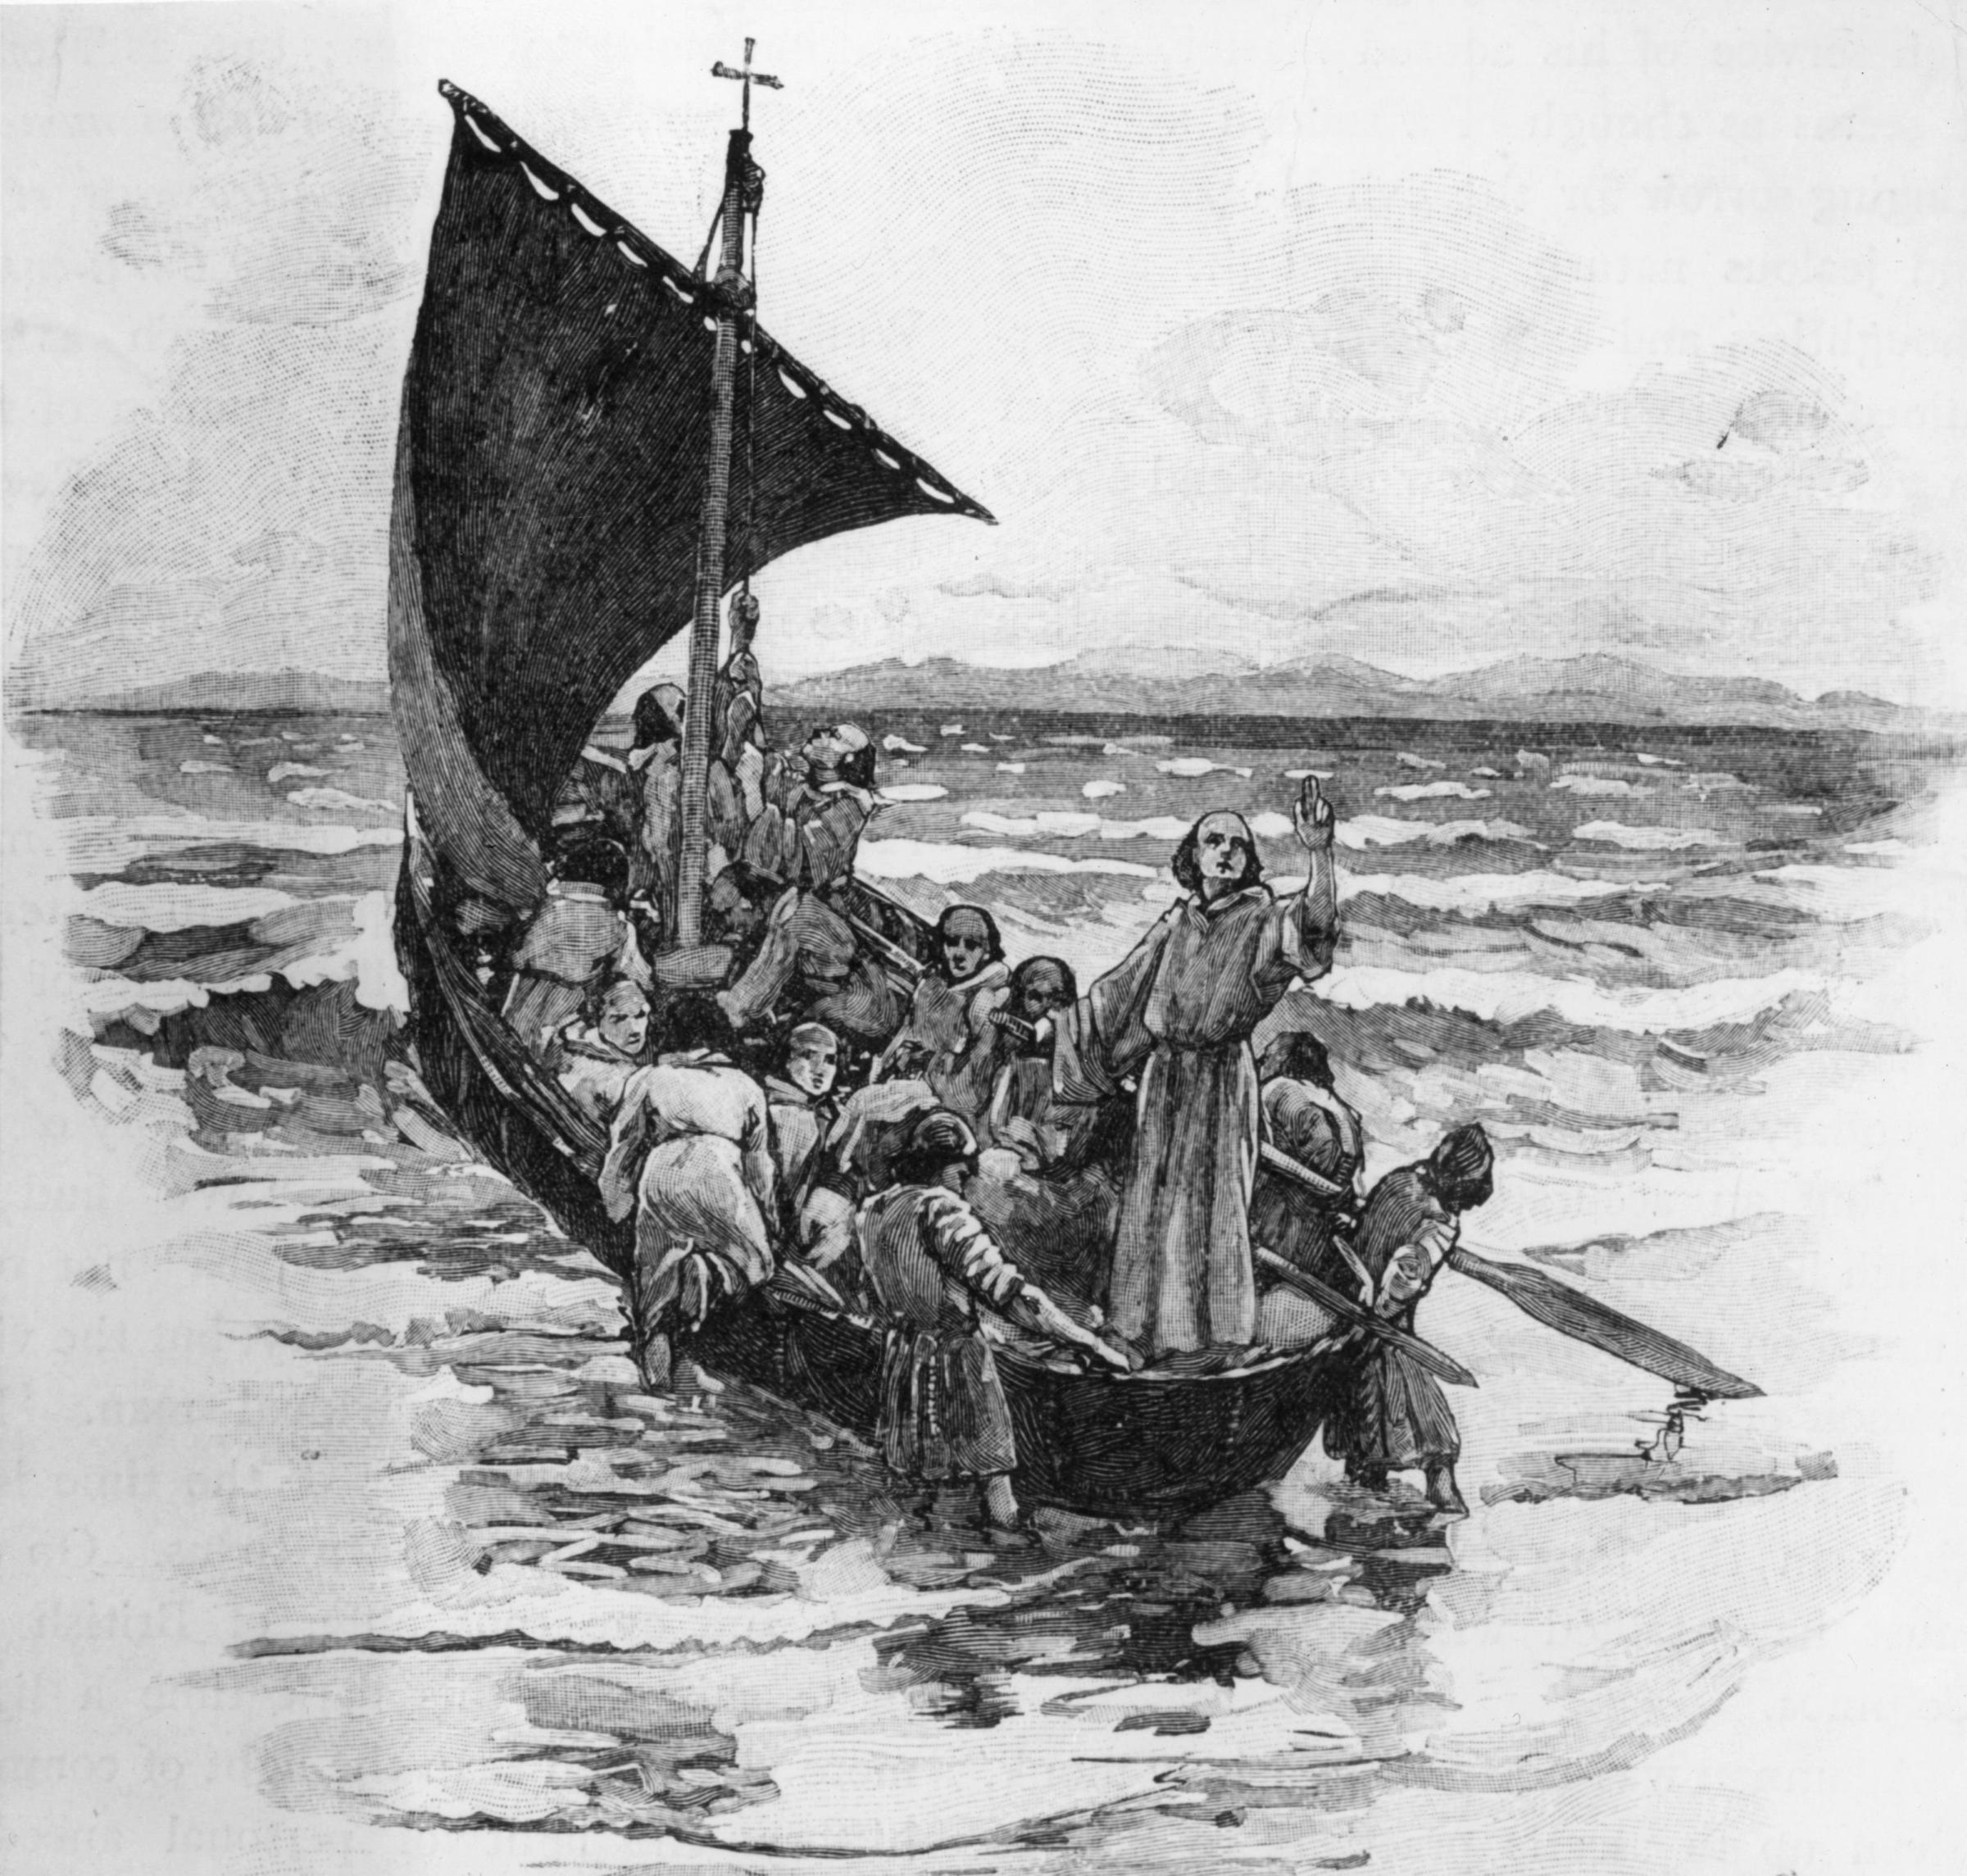 563 AD, Irish missionary Saint Columba (c. 521 - 597), known as the Apostle of Caledonia, sailing with his twelve disciples to the island of Iona on the west coast of Scotland. Columba worked to convert the Picts to Christianity and travelled around the